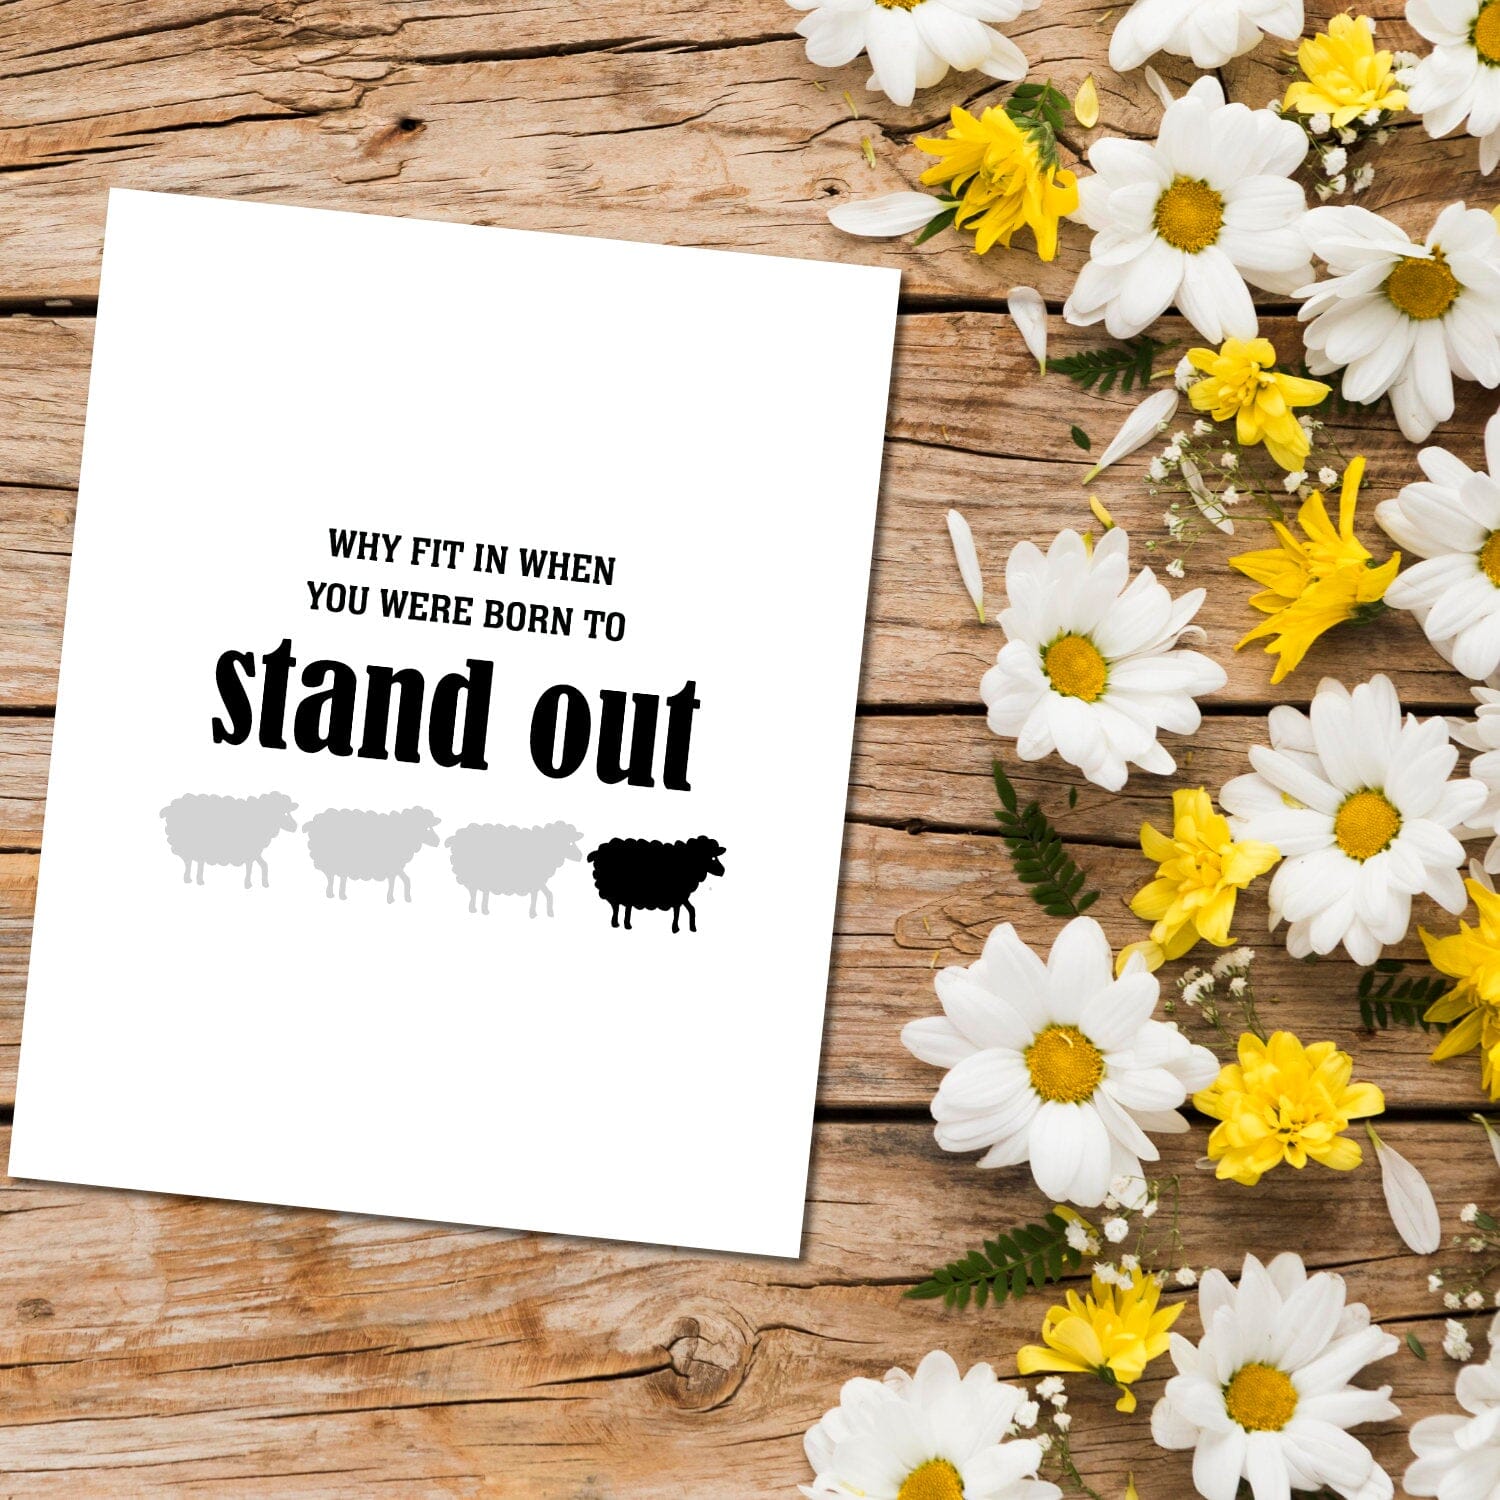 Why Fit in When You Were Born to Stand Out - Wise and Witty Print Wise and Wiseass Quotes Song Lyrics Art 8x10 Print 